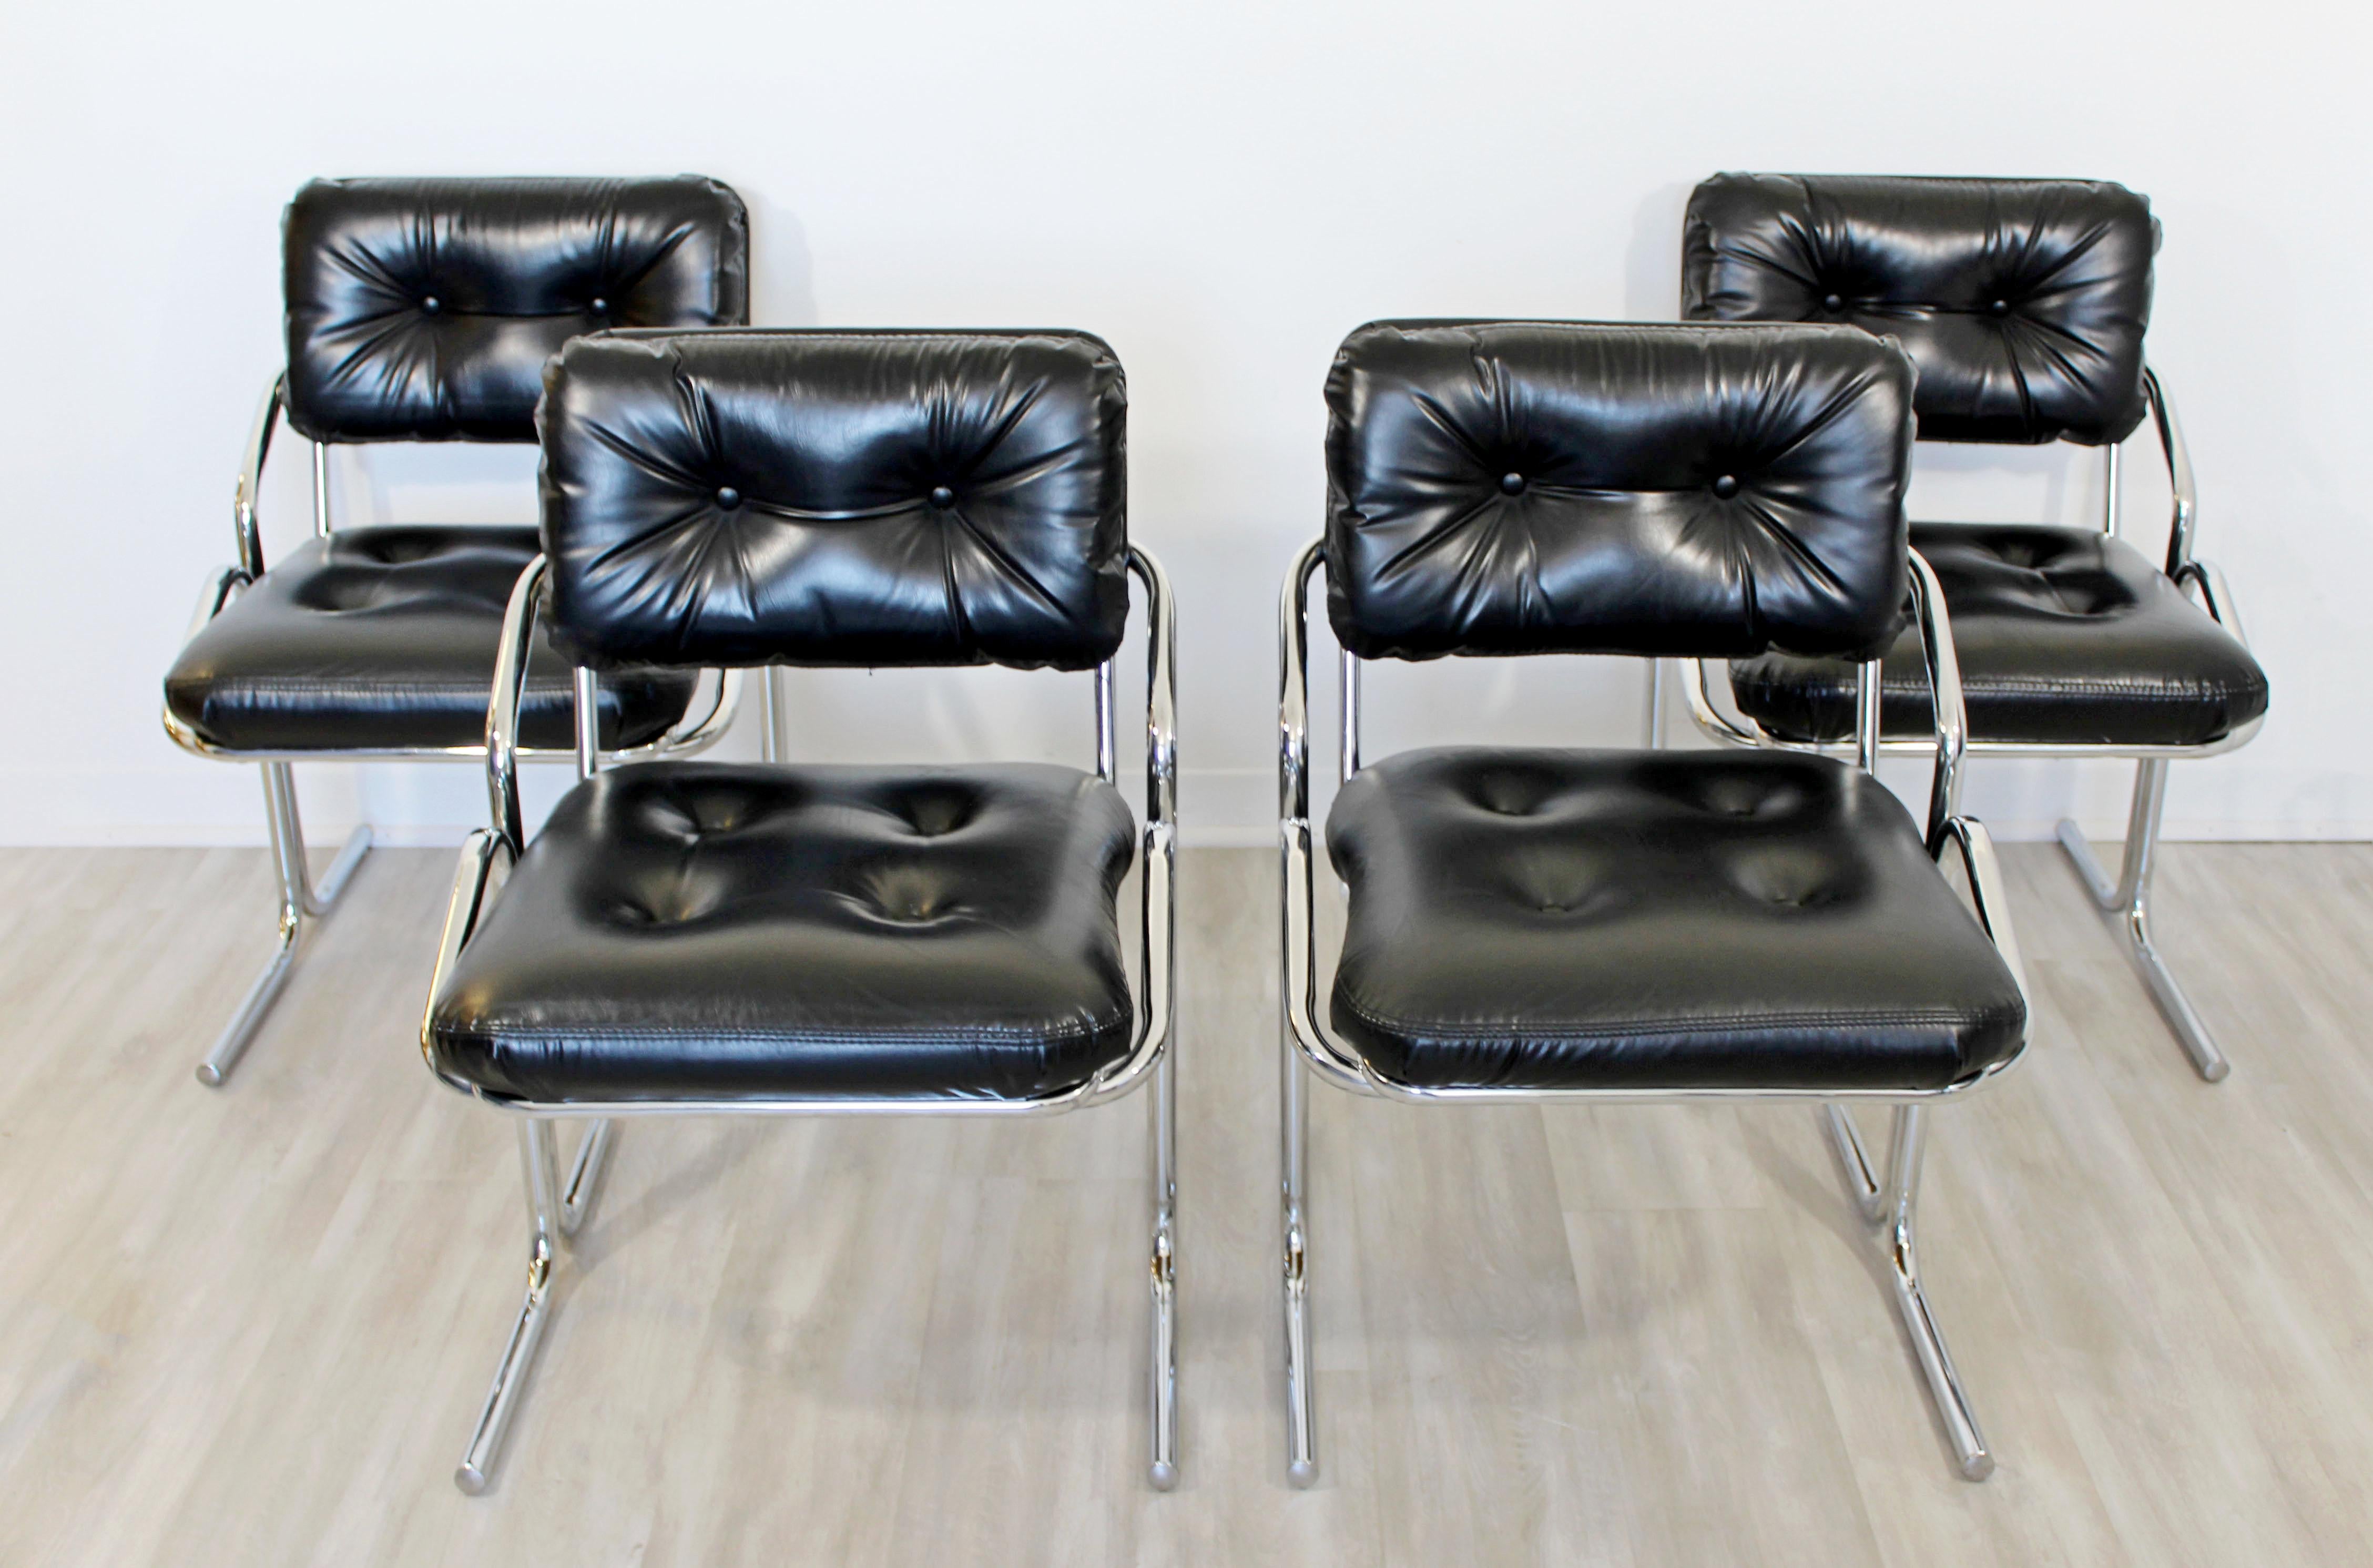 For your consideration is an incredible set of four side chairs, made of tubular chrome, black Naugahyde, Cal-Style by Jerry Johnson, circa 1970s. In very good vintage condition. The dimensions are 22.5